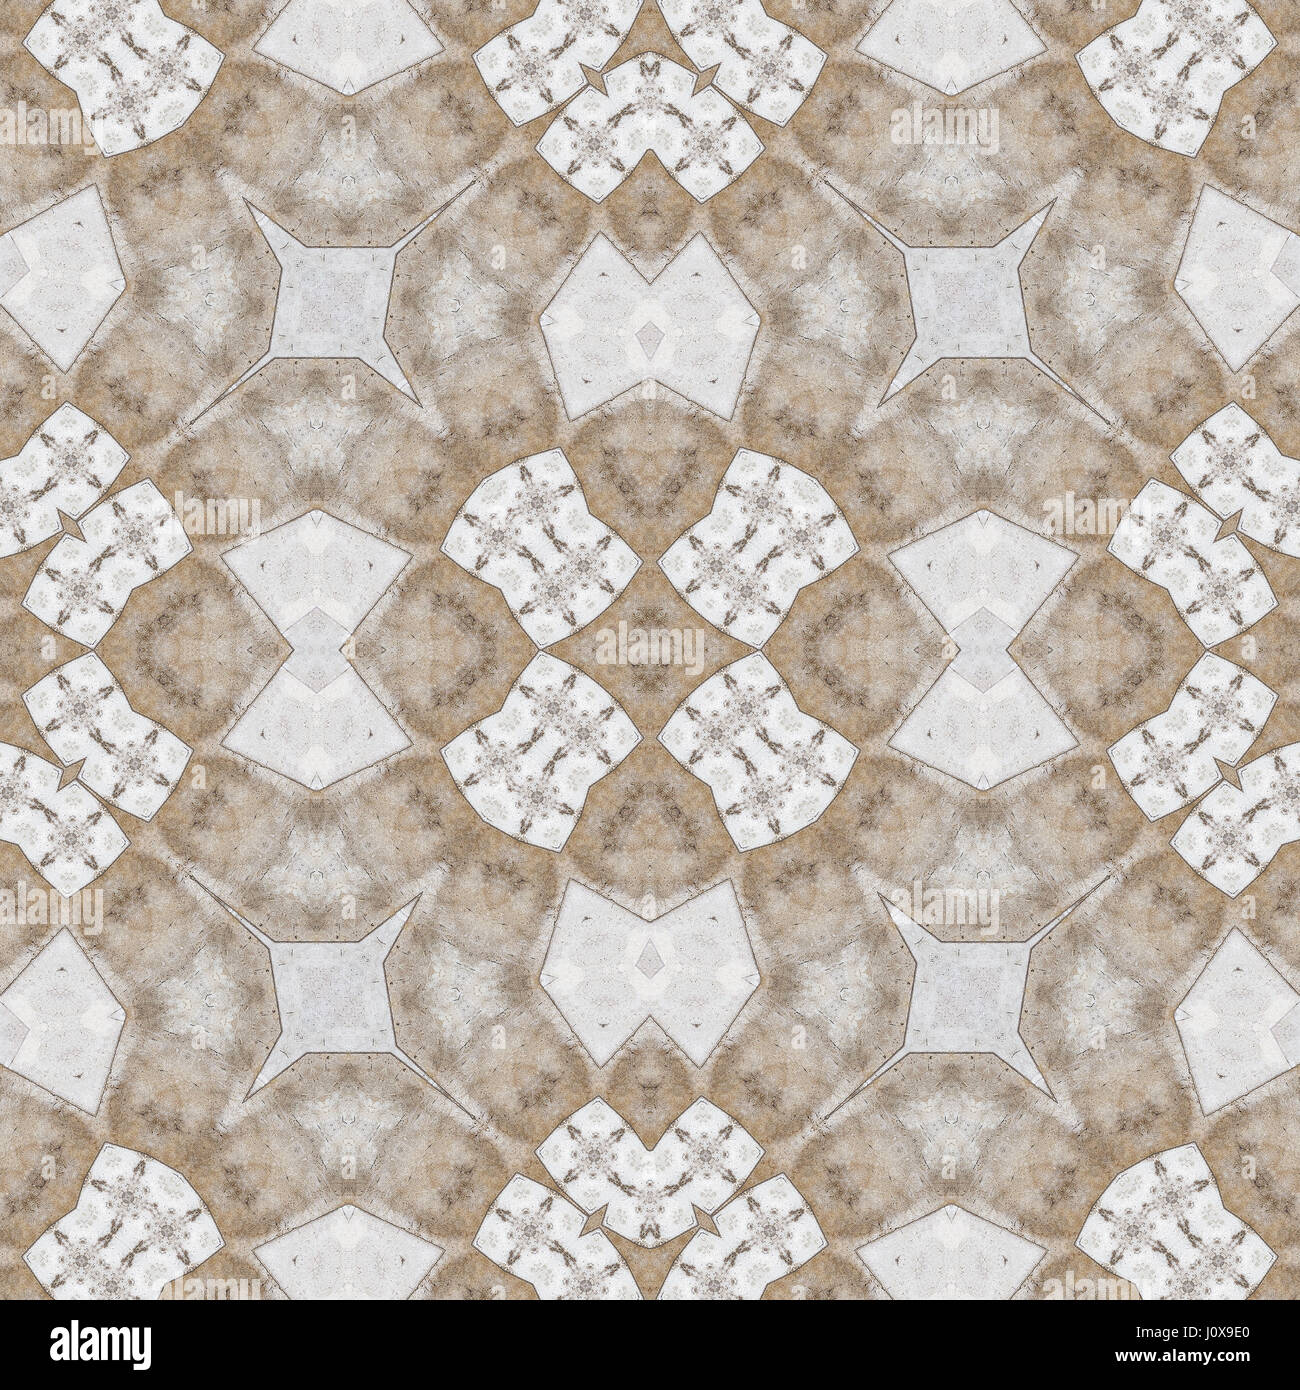 Abstract pattern or background based on stone brick wall, mosaic or decoration Stock Photo